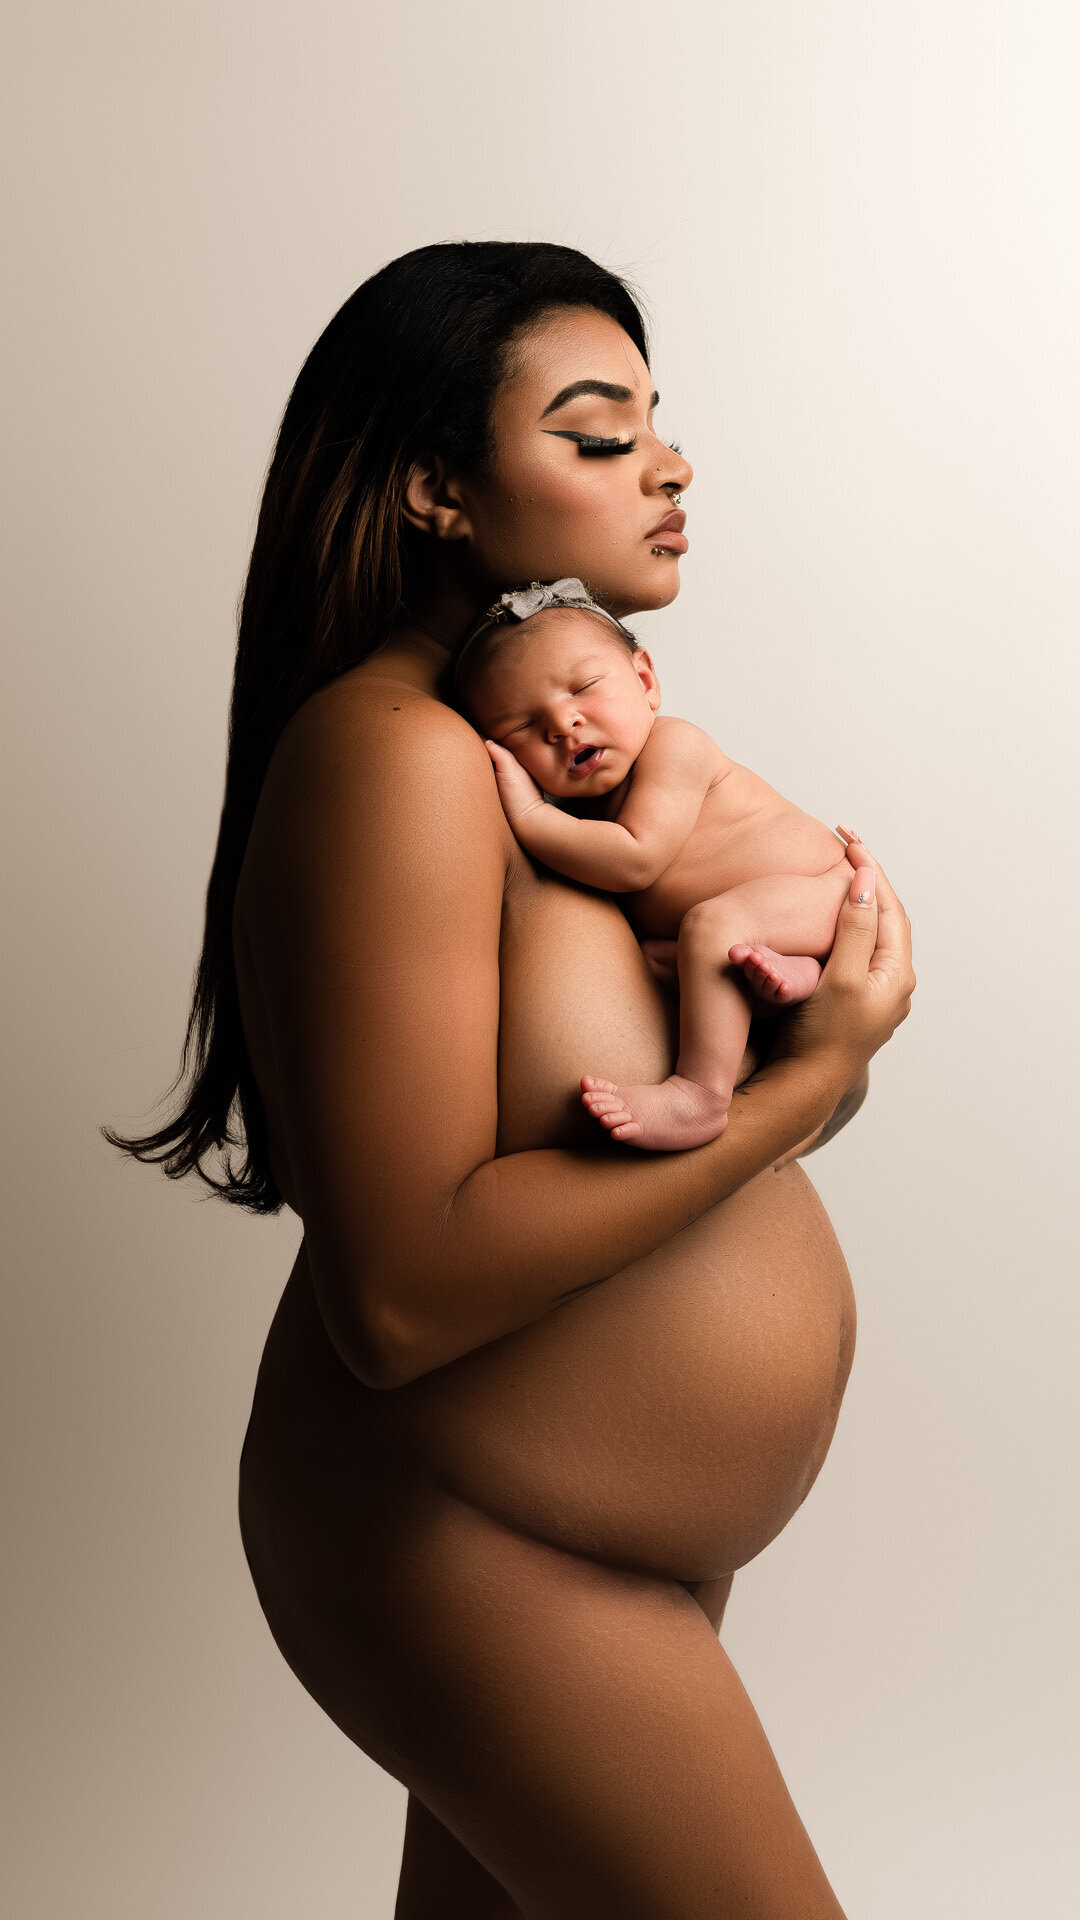 Newborn baby with mother skin to skin photography.